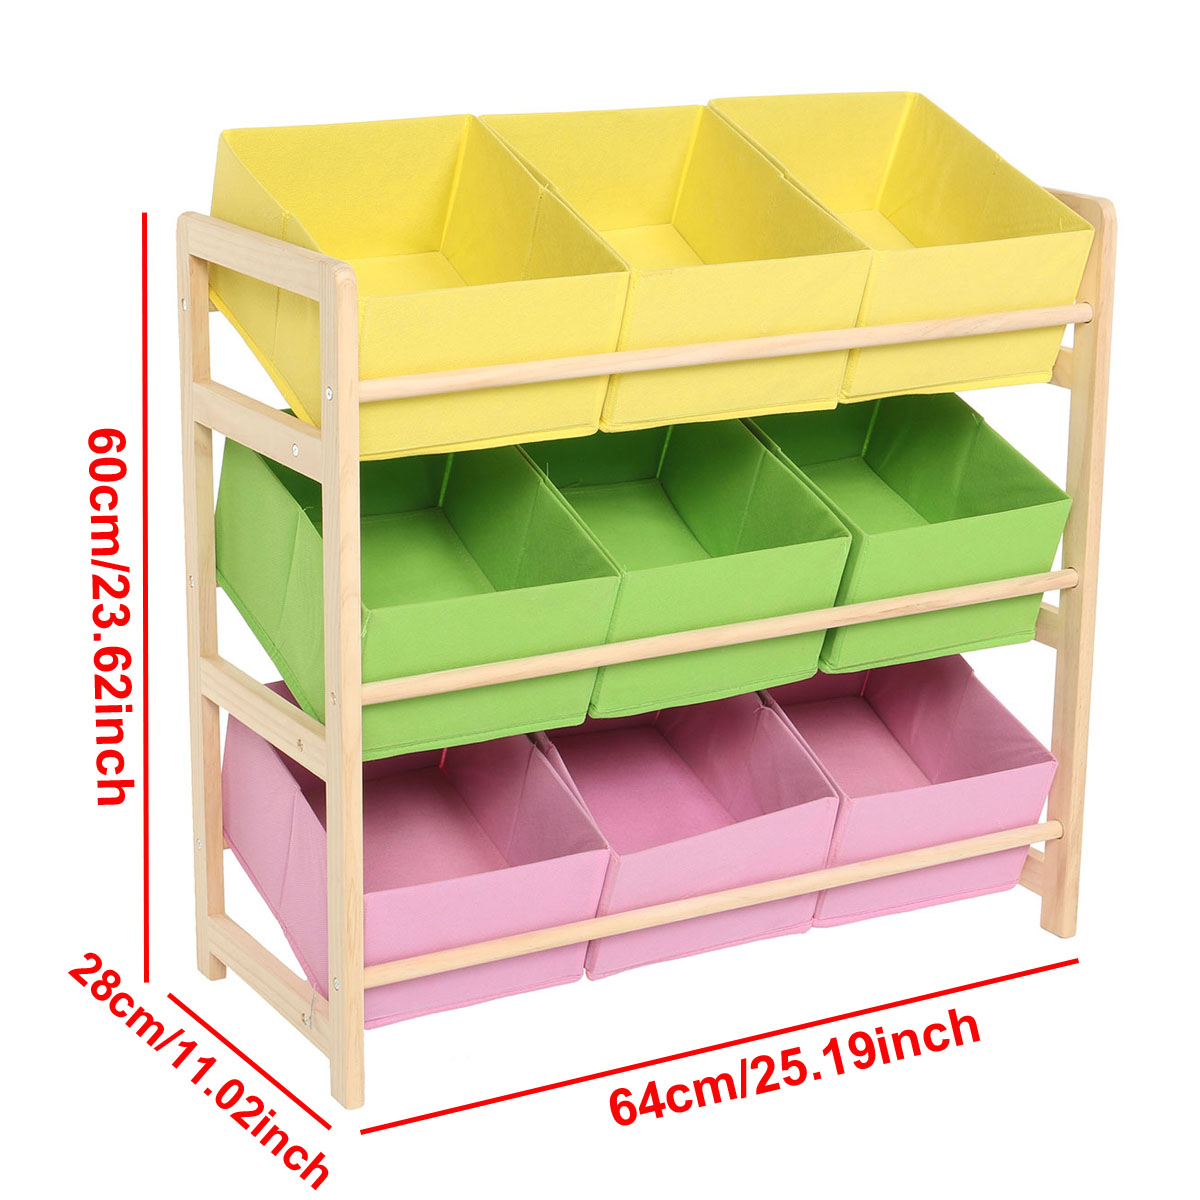 66309CM-Yellow-Pink-Green-Solid-Wood-Childrens-Toy-Rack-Storage-Rack-Toy-Rack-1754652-14